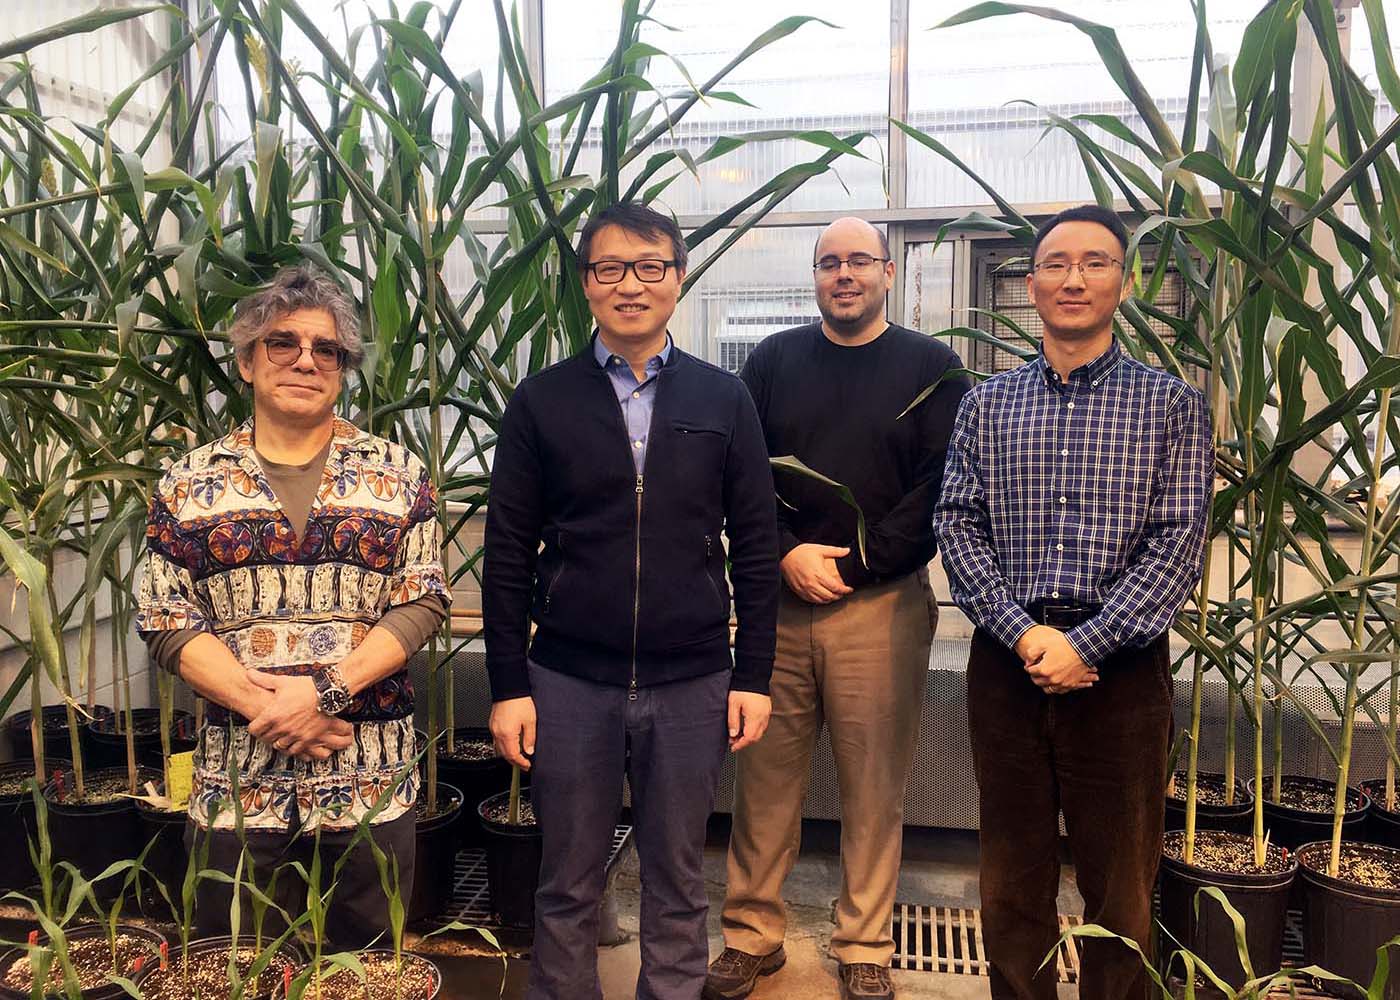 UNL's Tom Clemente, Jinliang Yang, James Schnable and Yufeng Ge collaborate on new NSF-funded plant science research